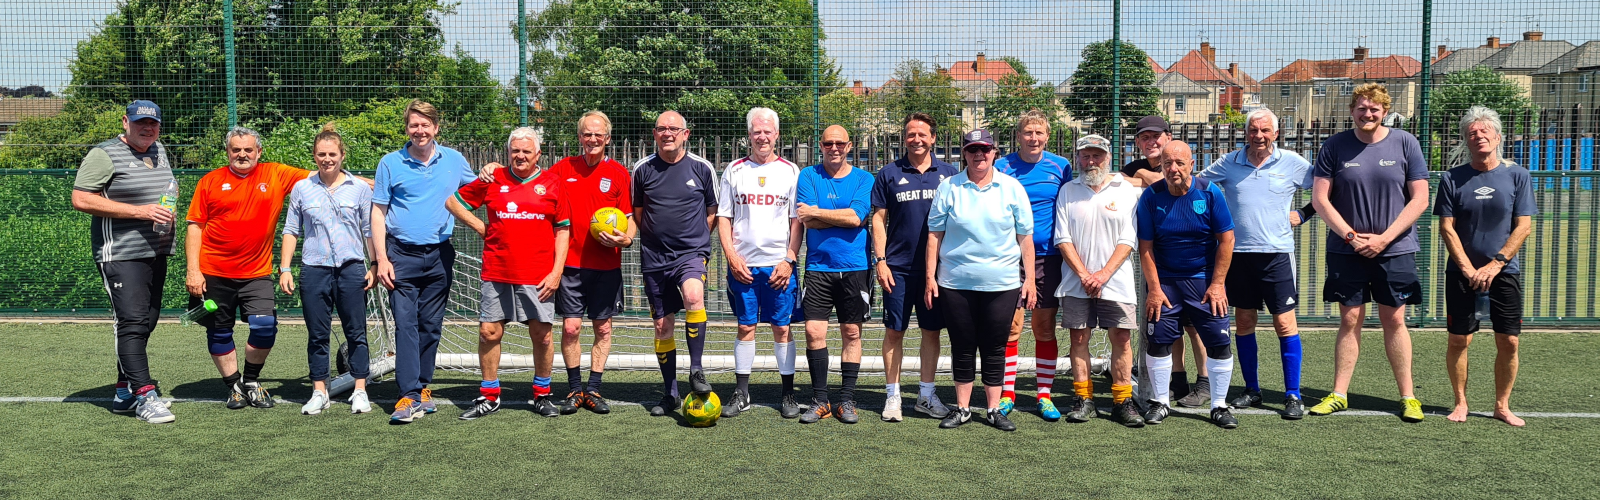 A group of 15-20 older men and women dressed in football kit look at the camera